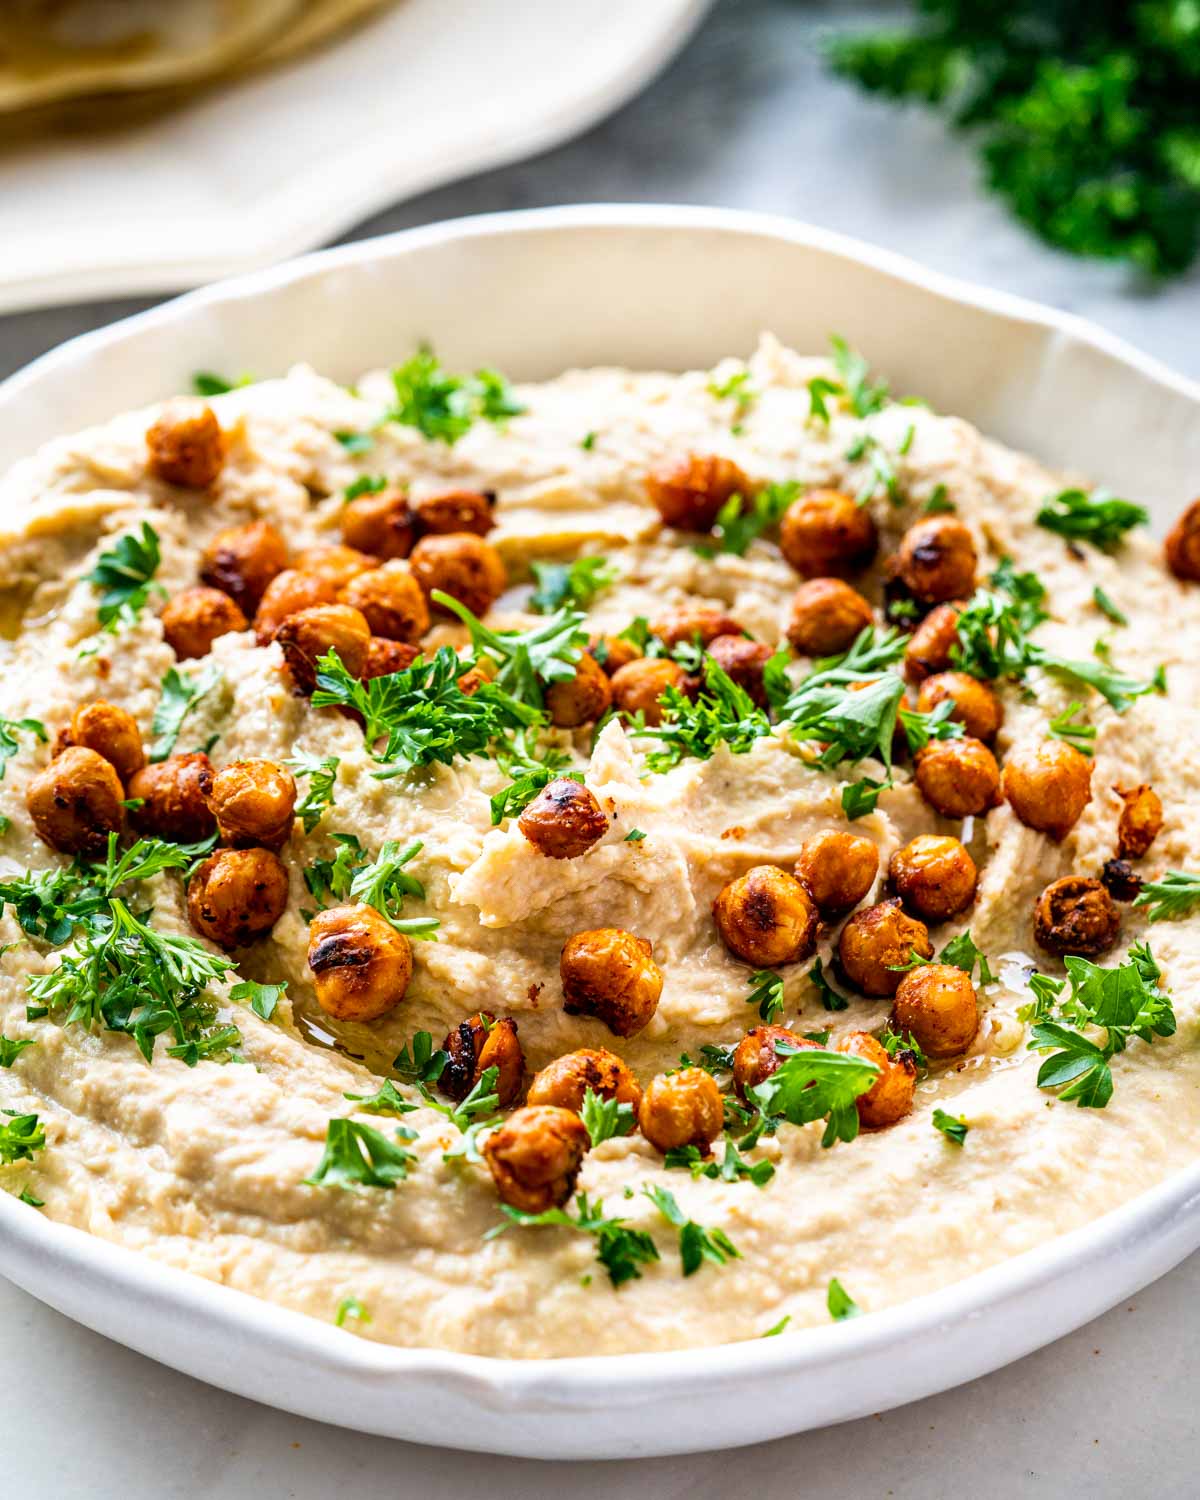 hummus in a plate garnished with parsley and toasted garbanzo beans.